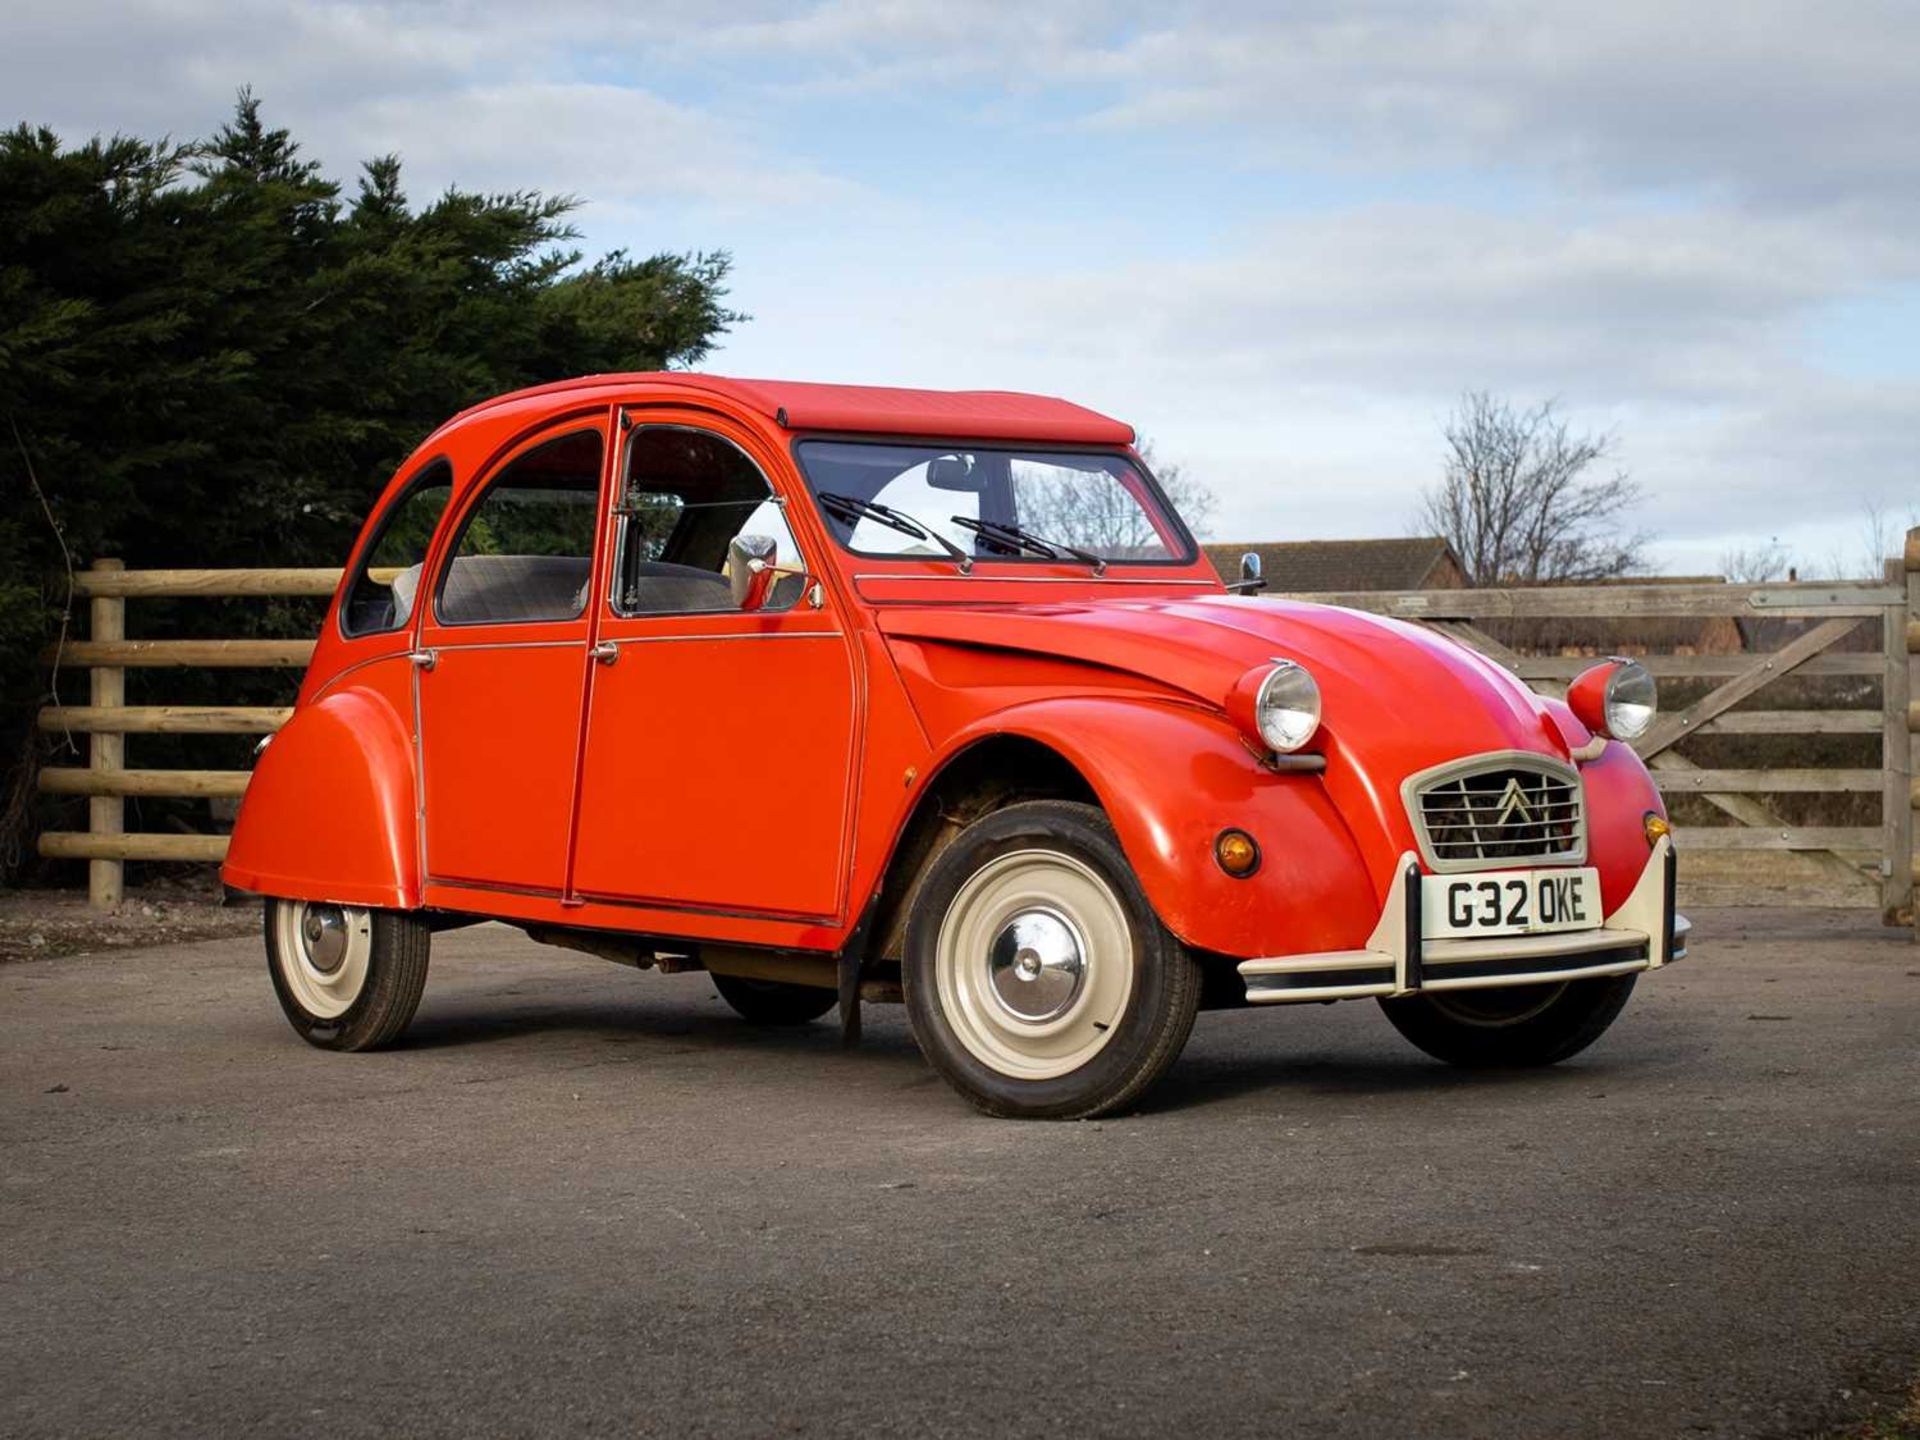 1989 Citroën 2CV6 Spécial Believed to have covered a credible 15,000 miles - Image 30 of 113